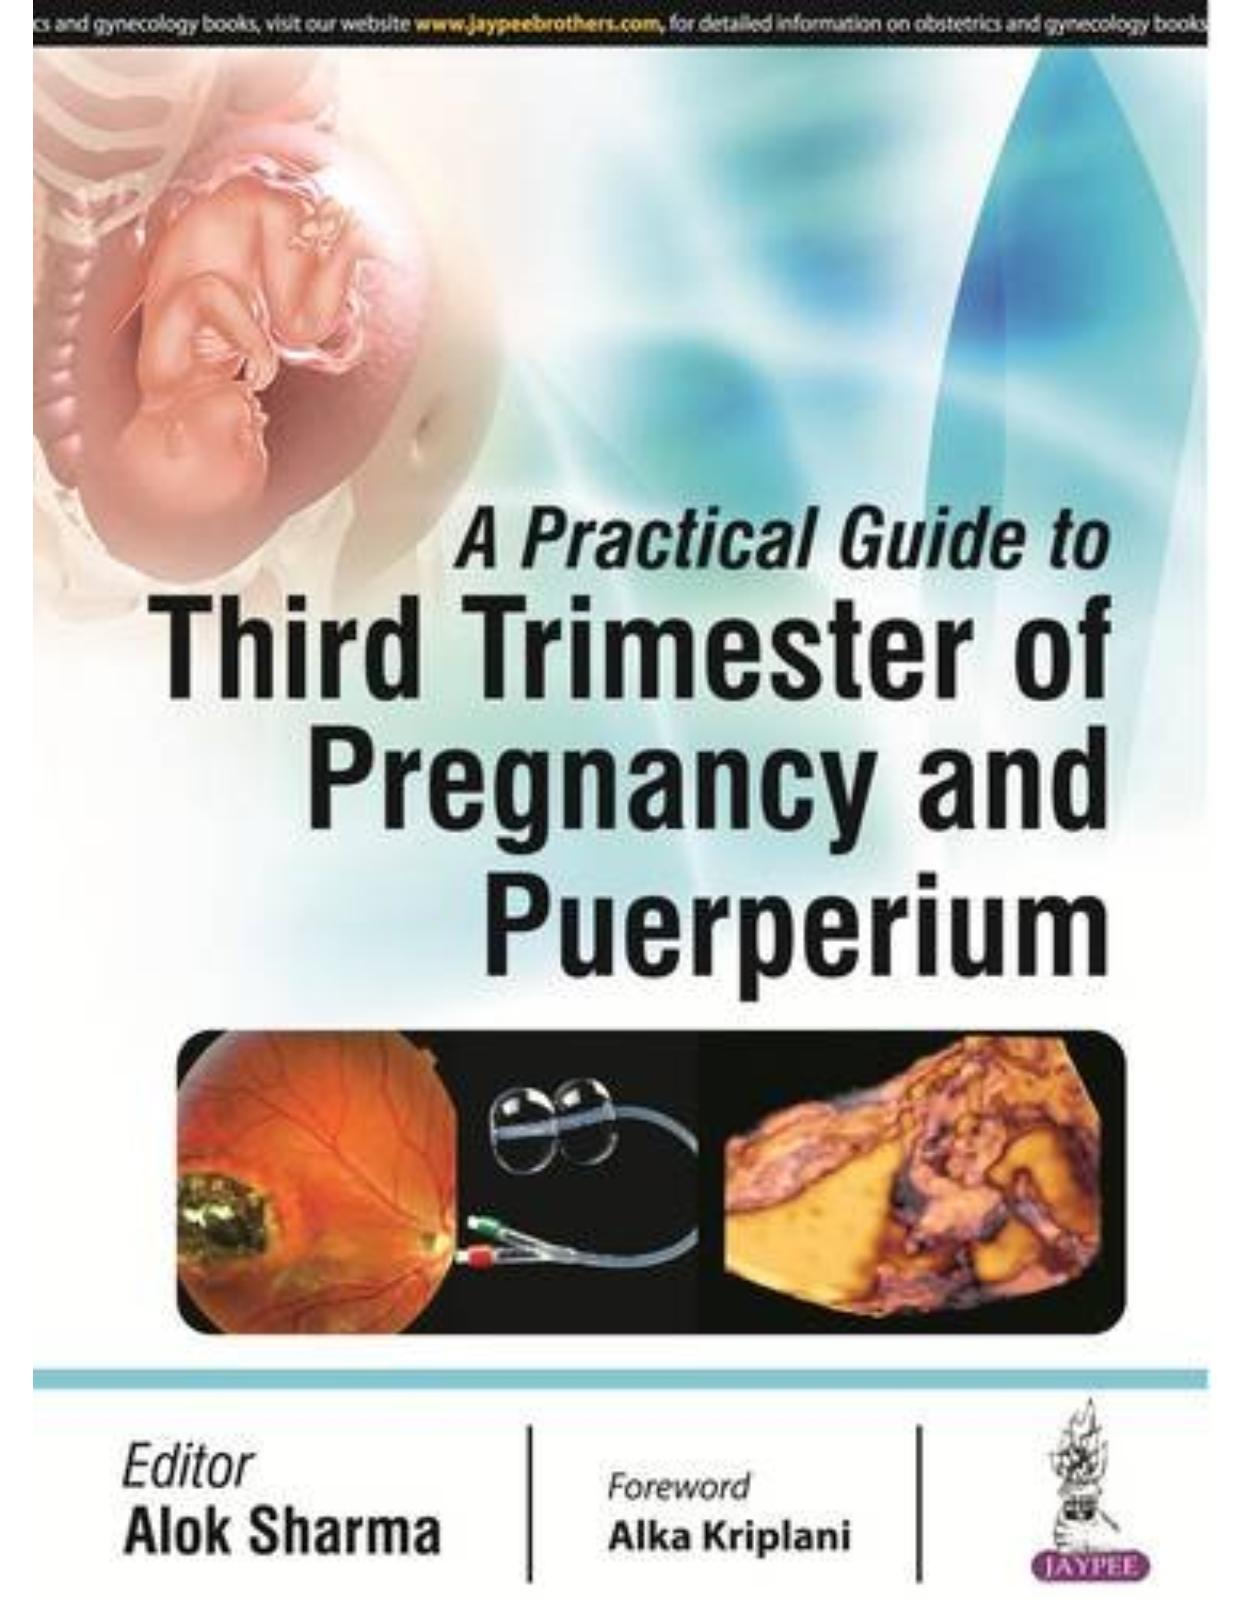  A Practical Guide to Third Trimester of Pregnancy & Puerperium